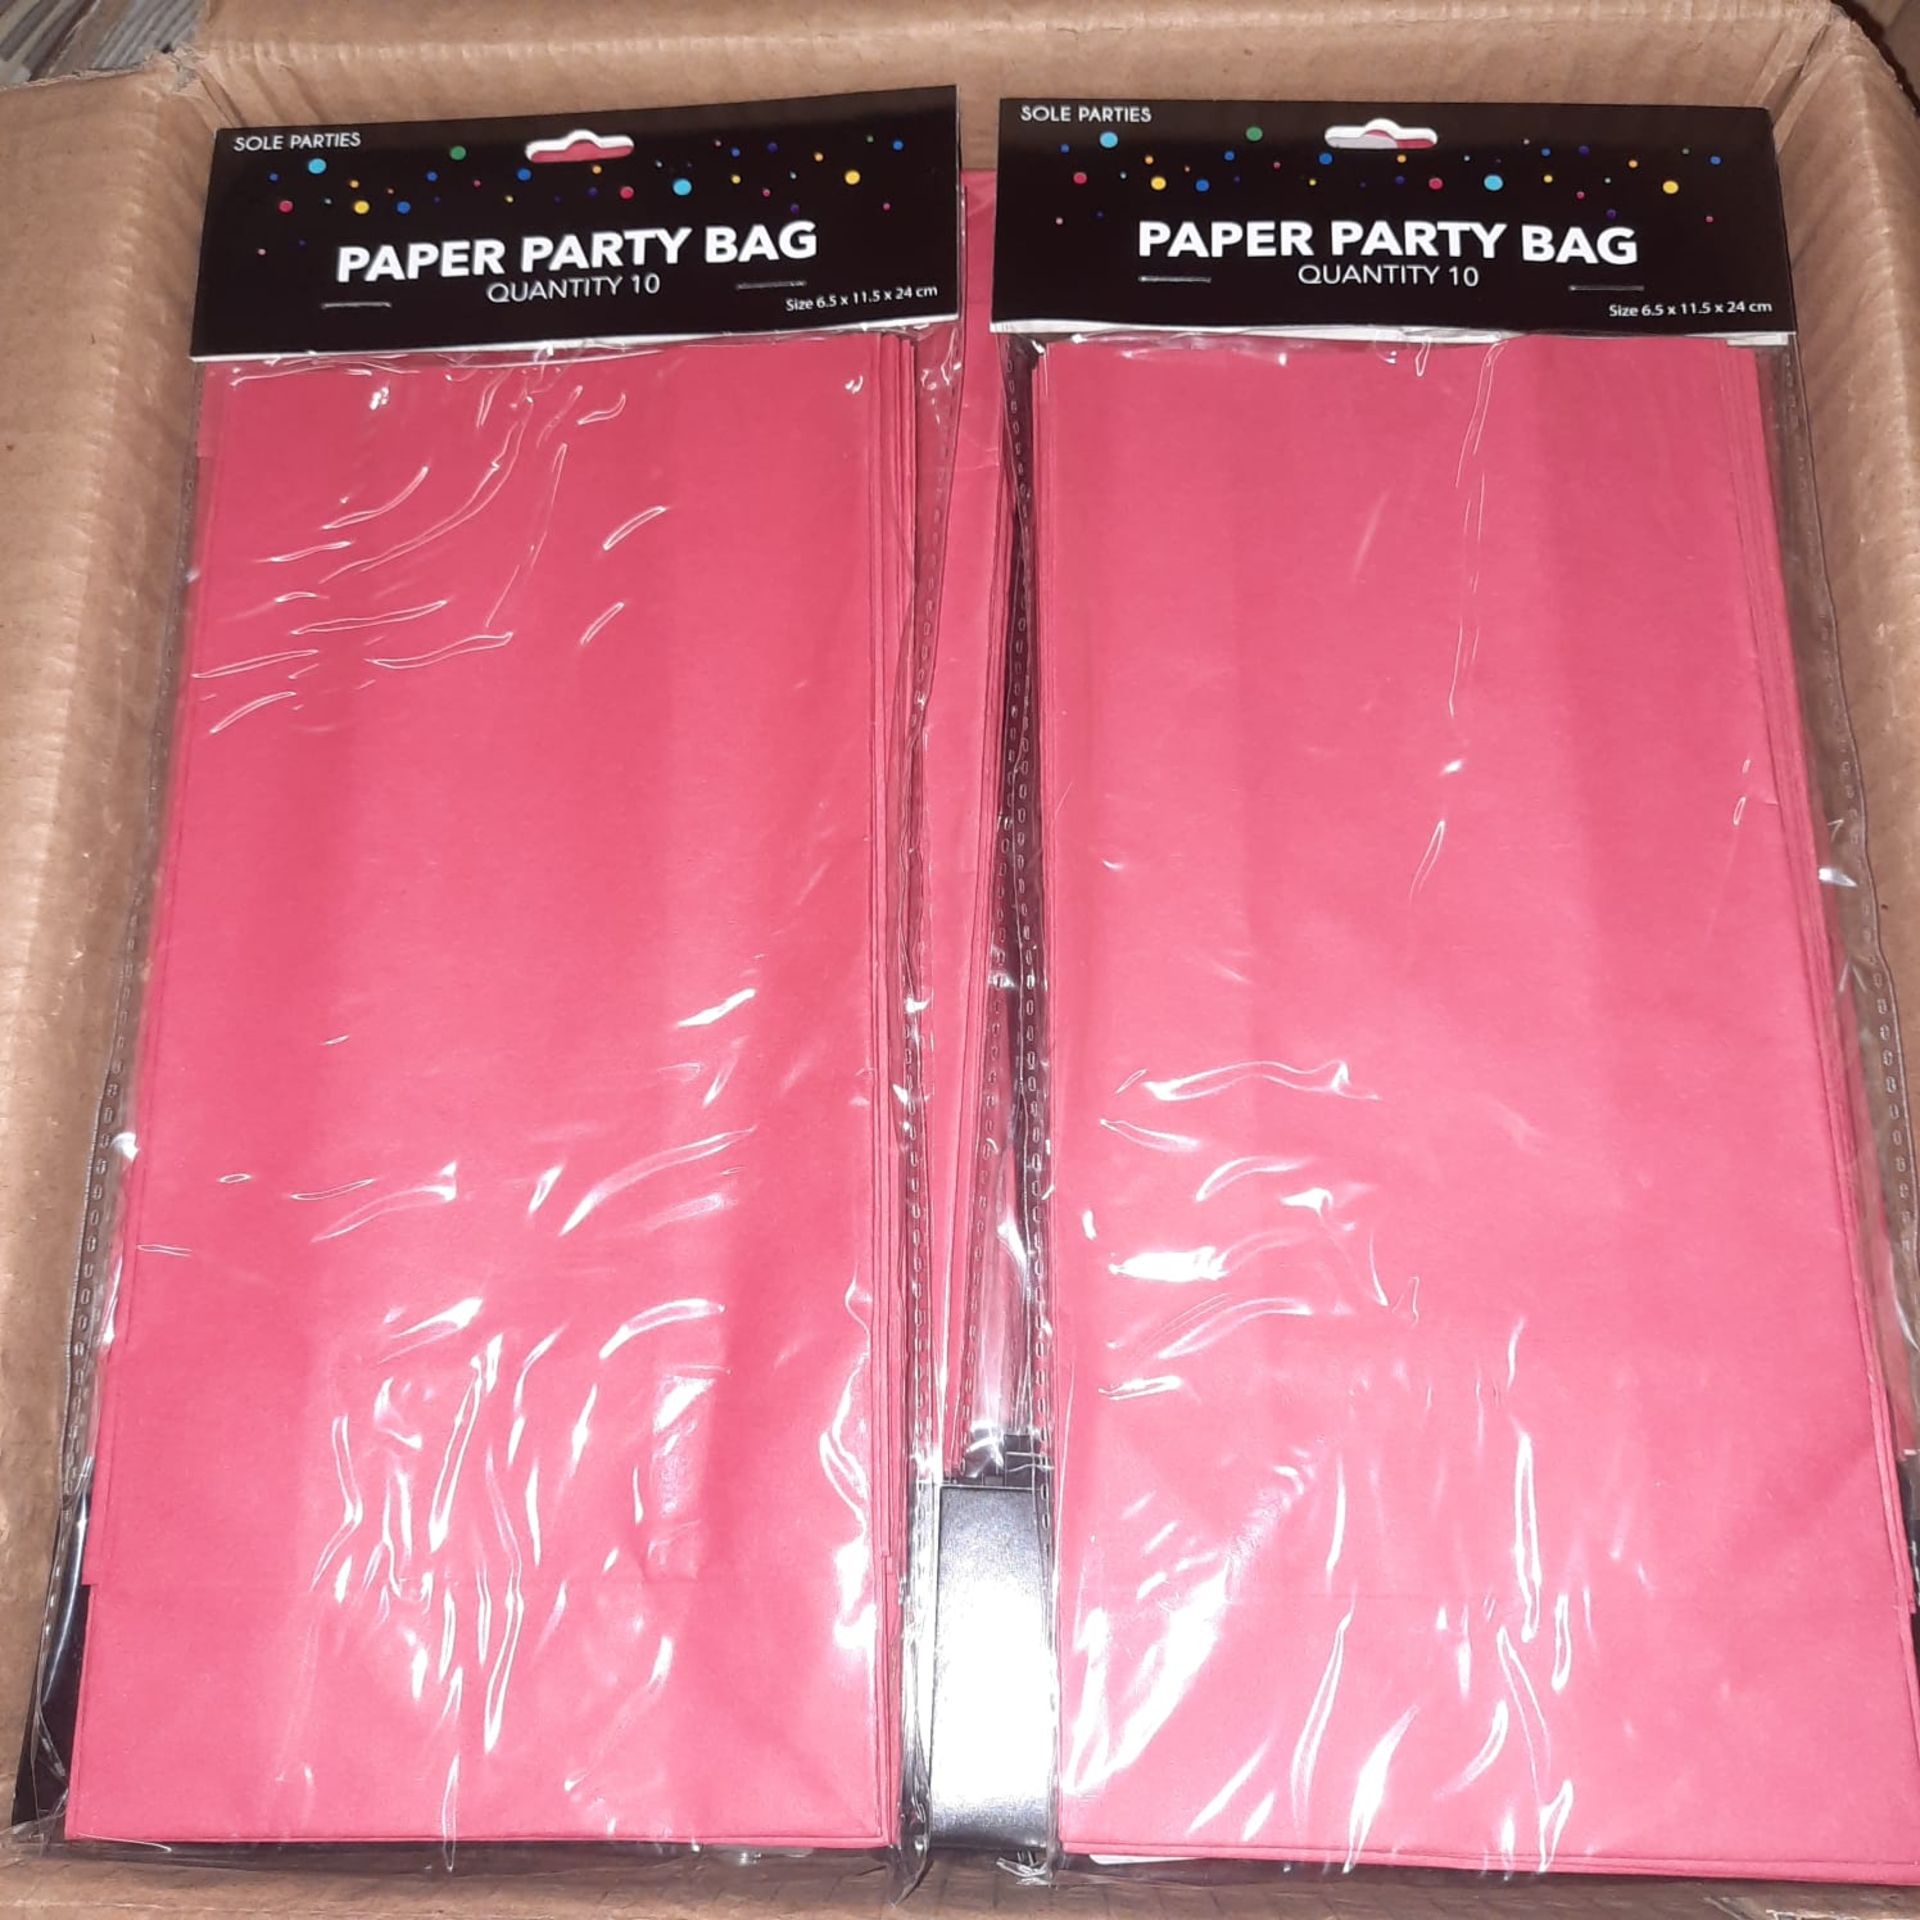 X 100 RED PAPER PARTY BAGS - ALL NEW - SALEROOM ON MID OF ROW (C).